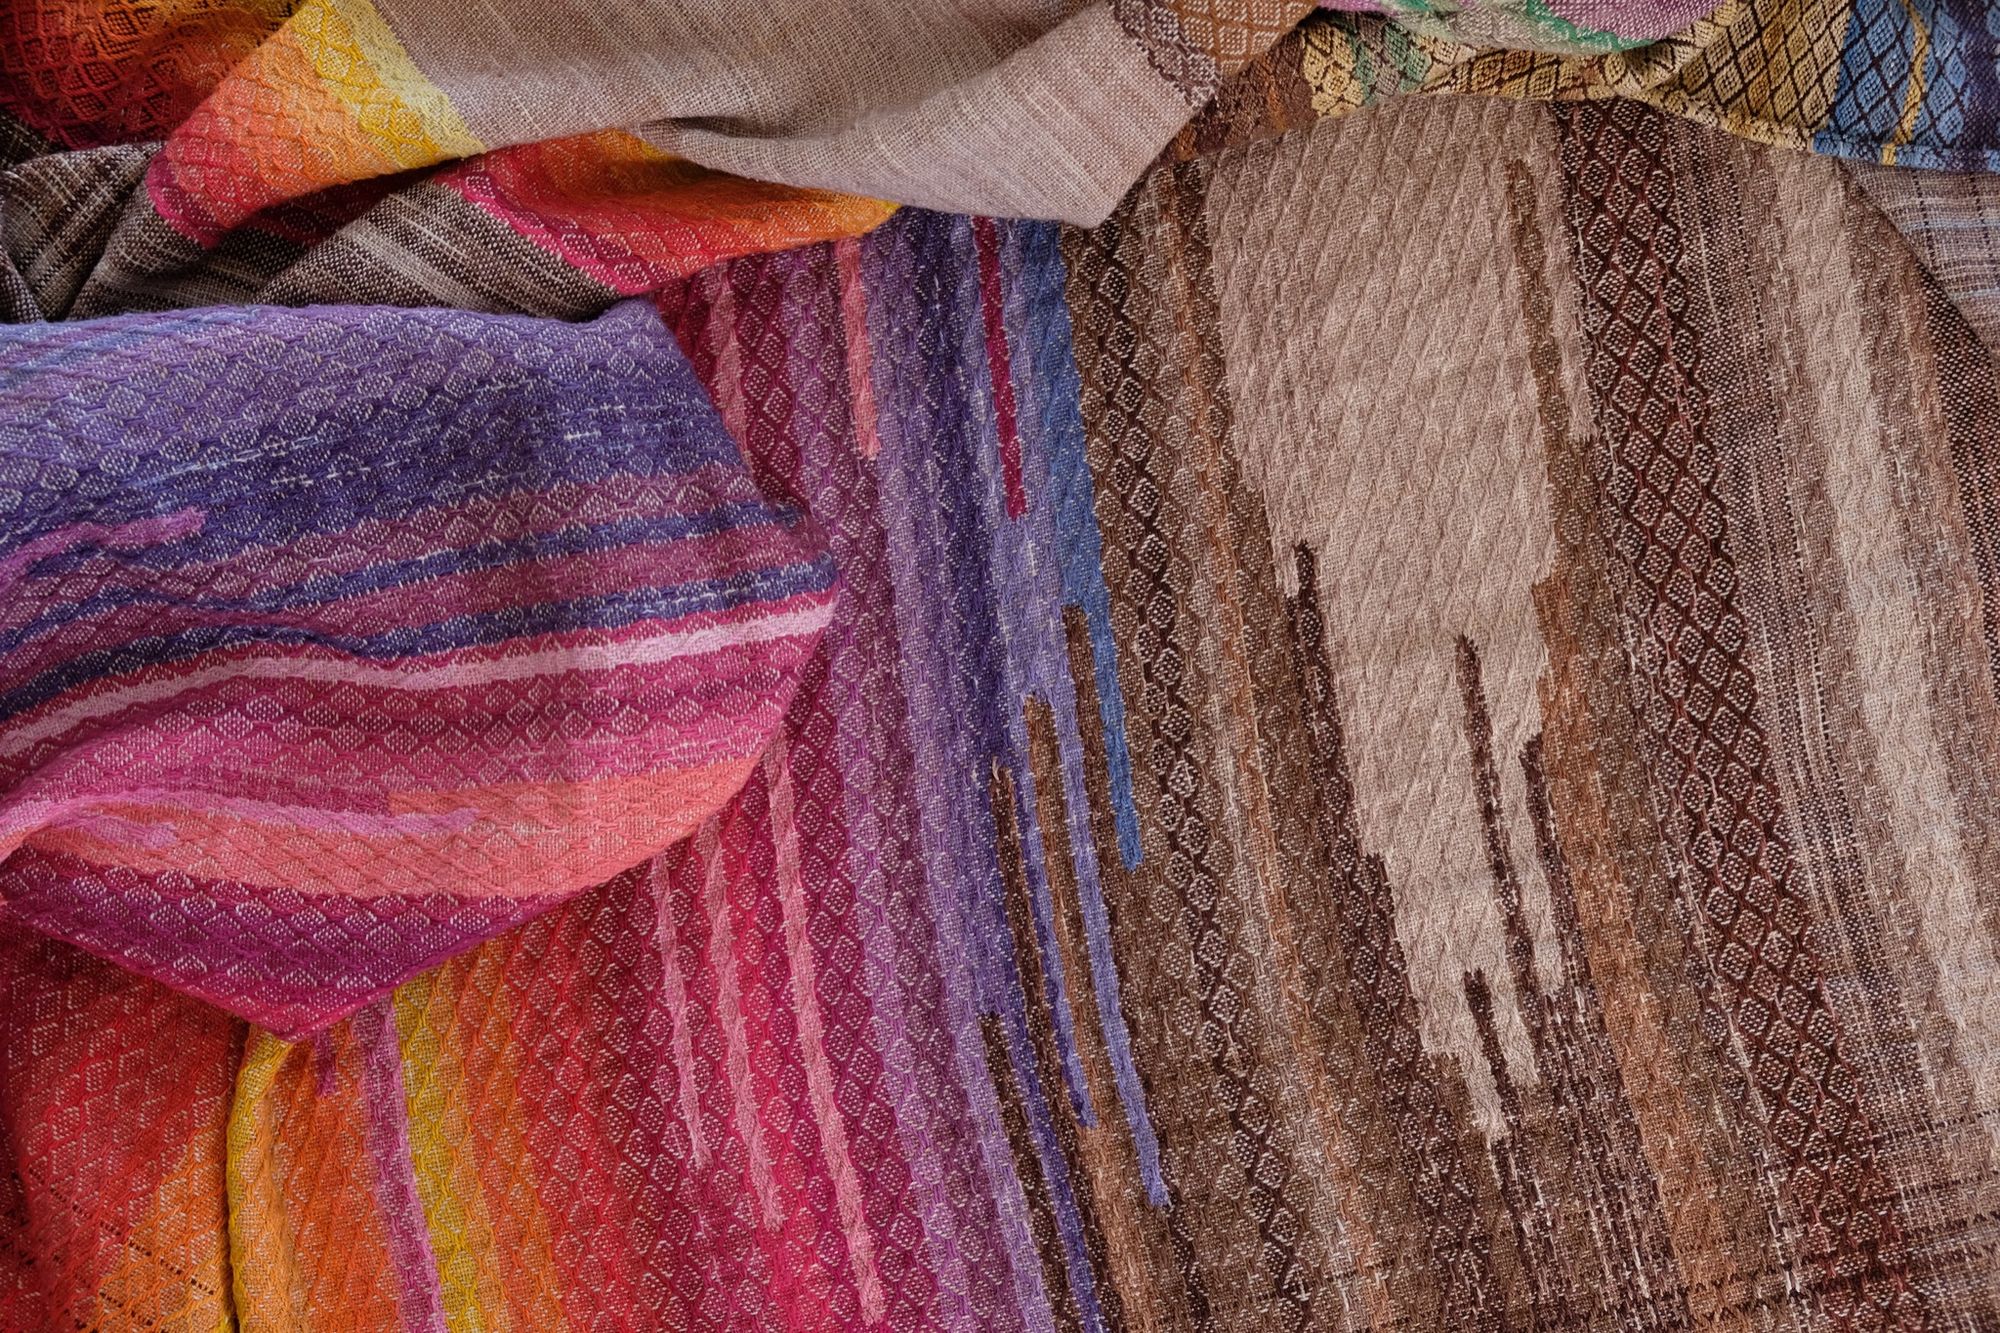 Handwoven, highly textures Diamond pattern fabric in every color of the rainbow, with natural browns and tans